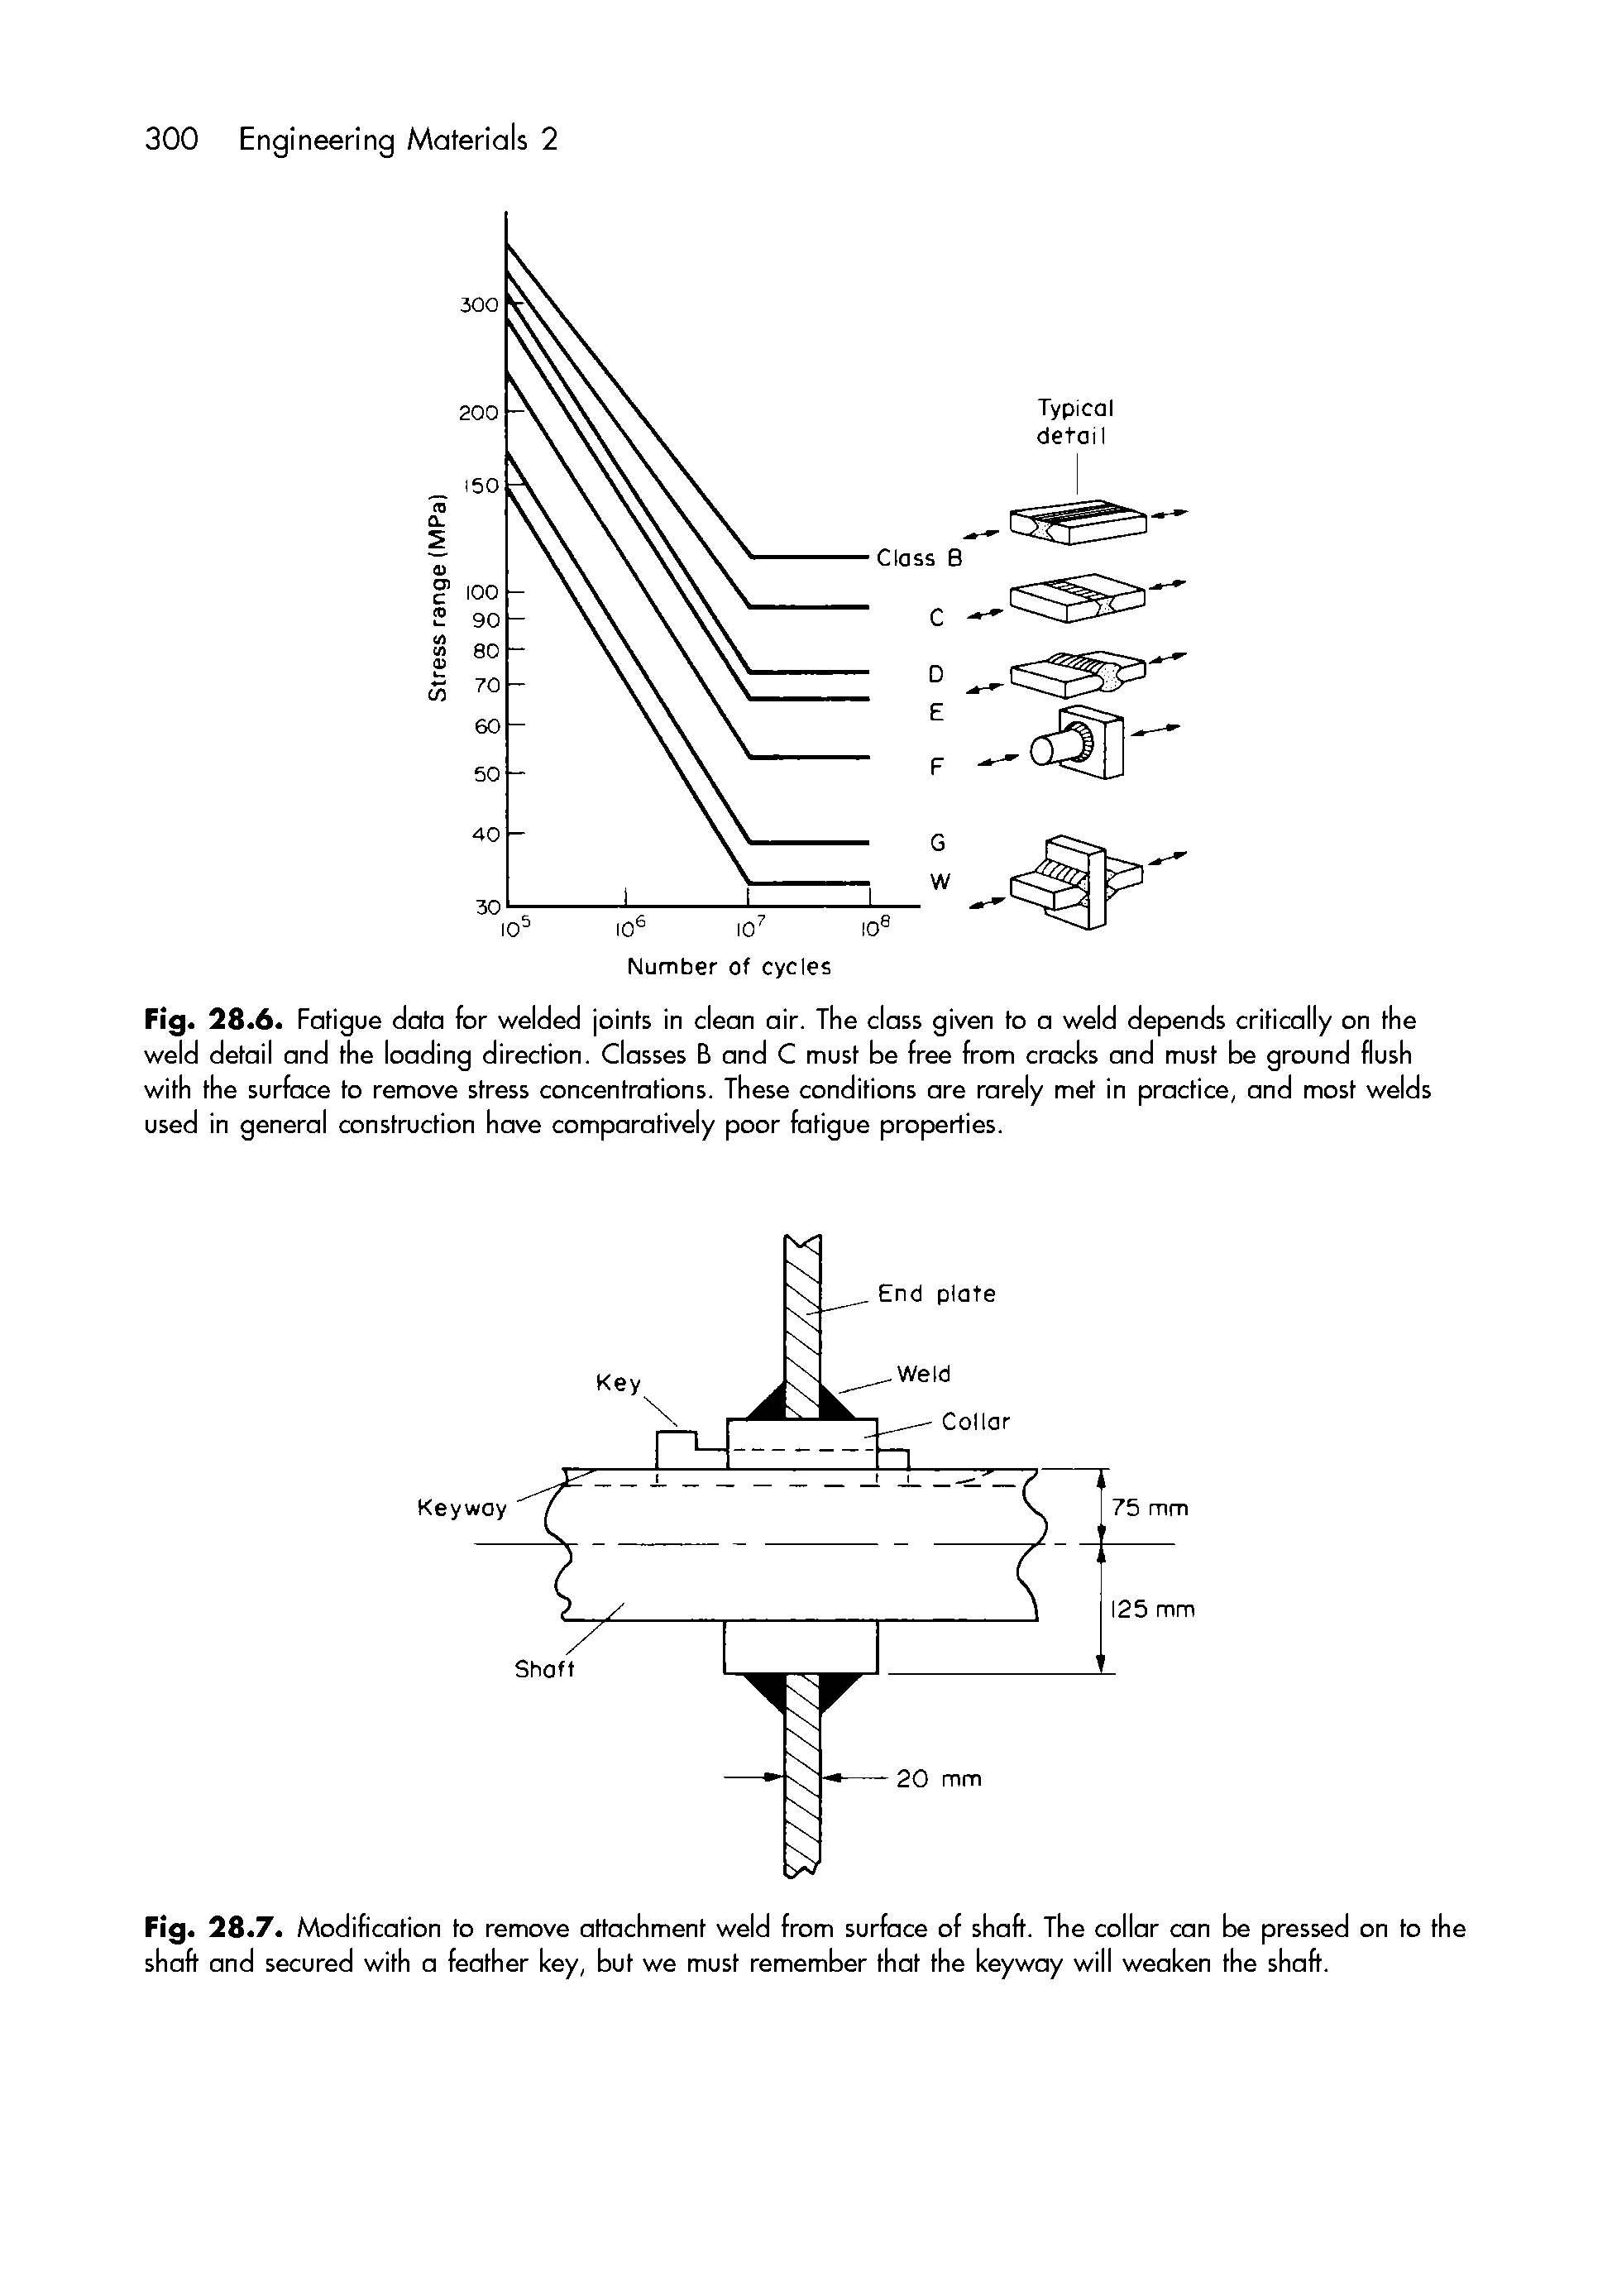 Fig. 28.6. Fatigue data for welded joints in clean air. The class given to a weld depends critically on the weld detail and the loading direction. Classes B and C must be free from cracks and must be ground flush with the surface to remove stress concentrations. These conditions ore rarely met in practice, and most welds used in general construction hove comparatively poor fatigue properties.